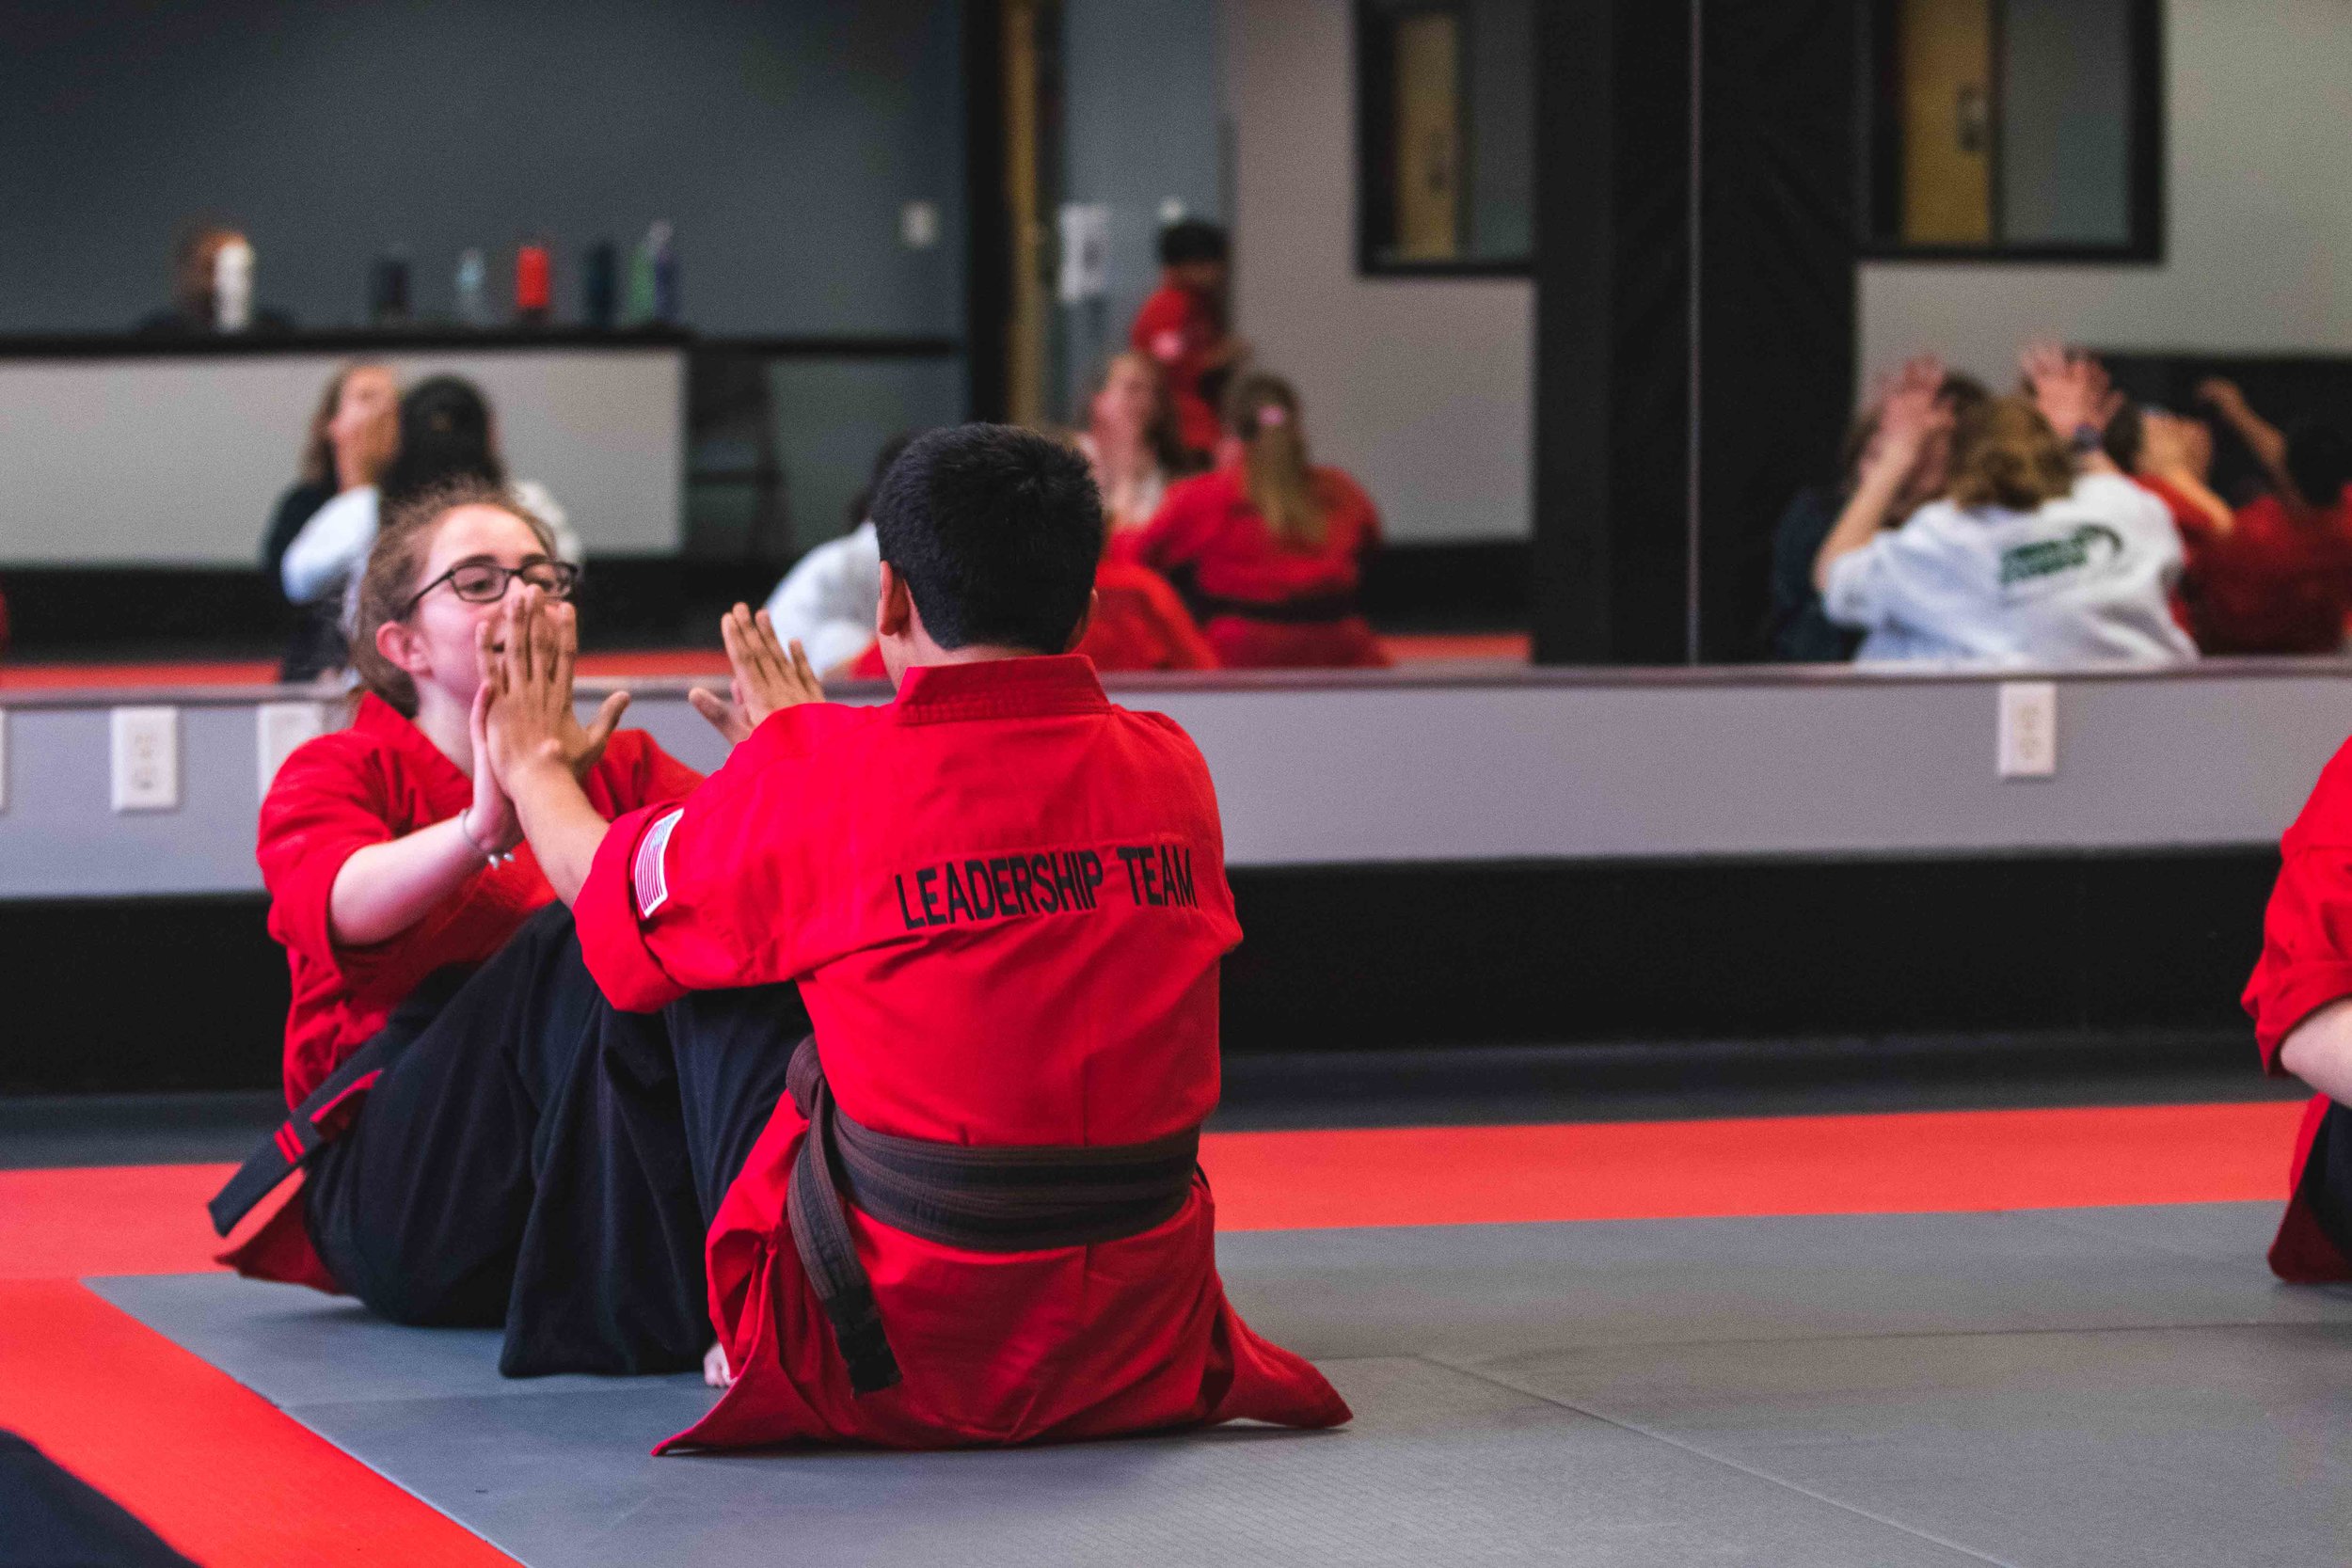 Martial Arts Classes for Teenage Girls and Boys in Bedford Massachusetts at Callahan's Karate 1.jpg